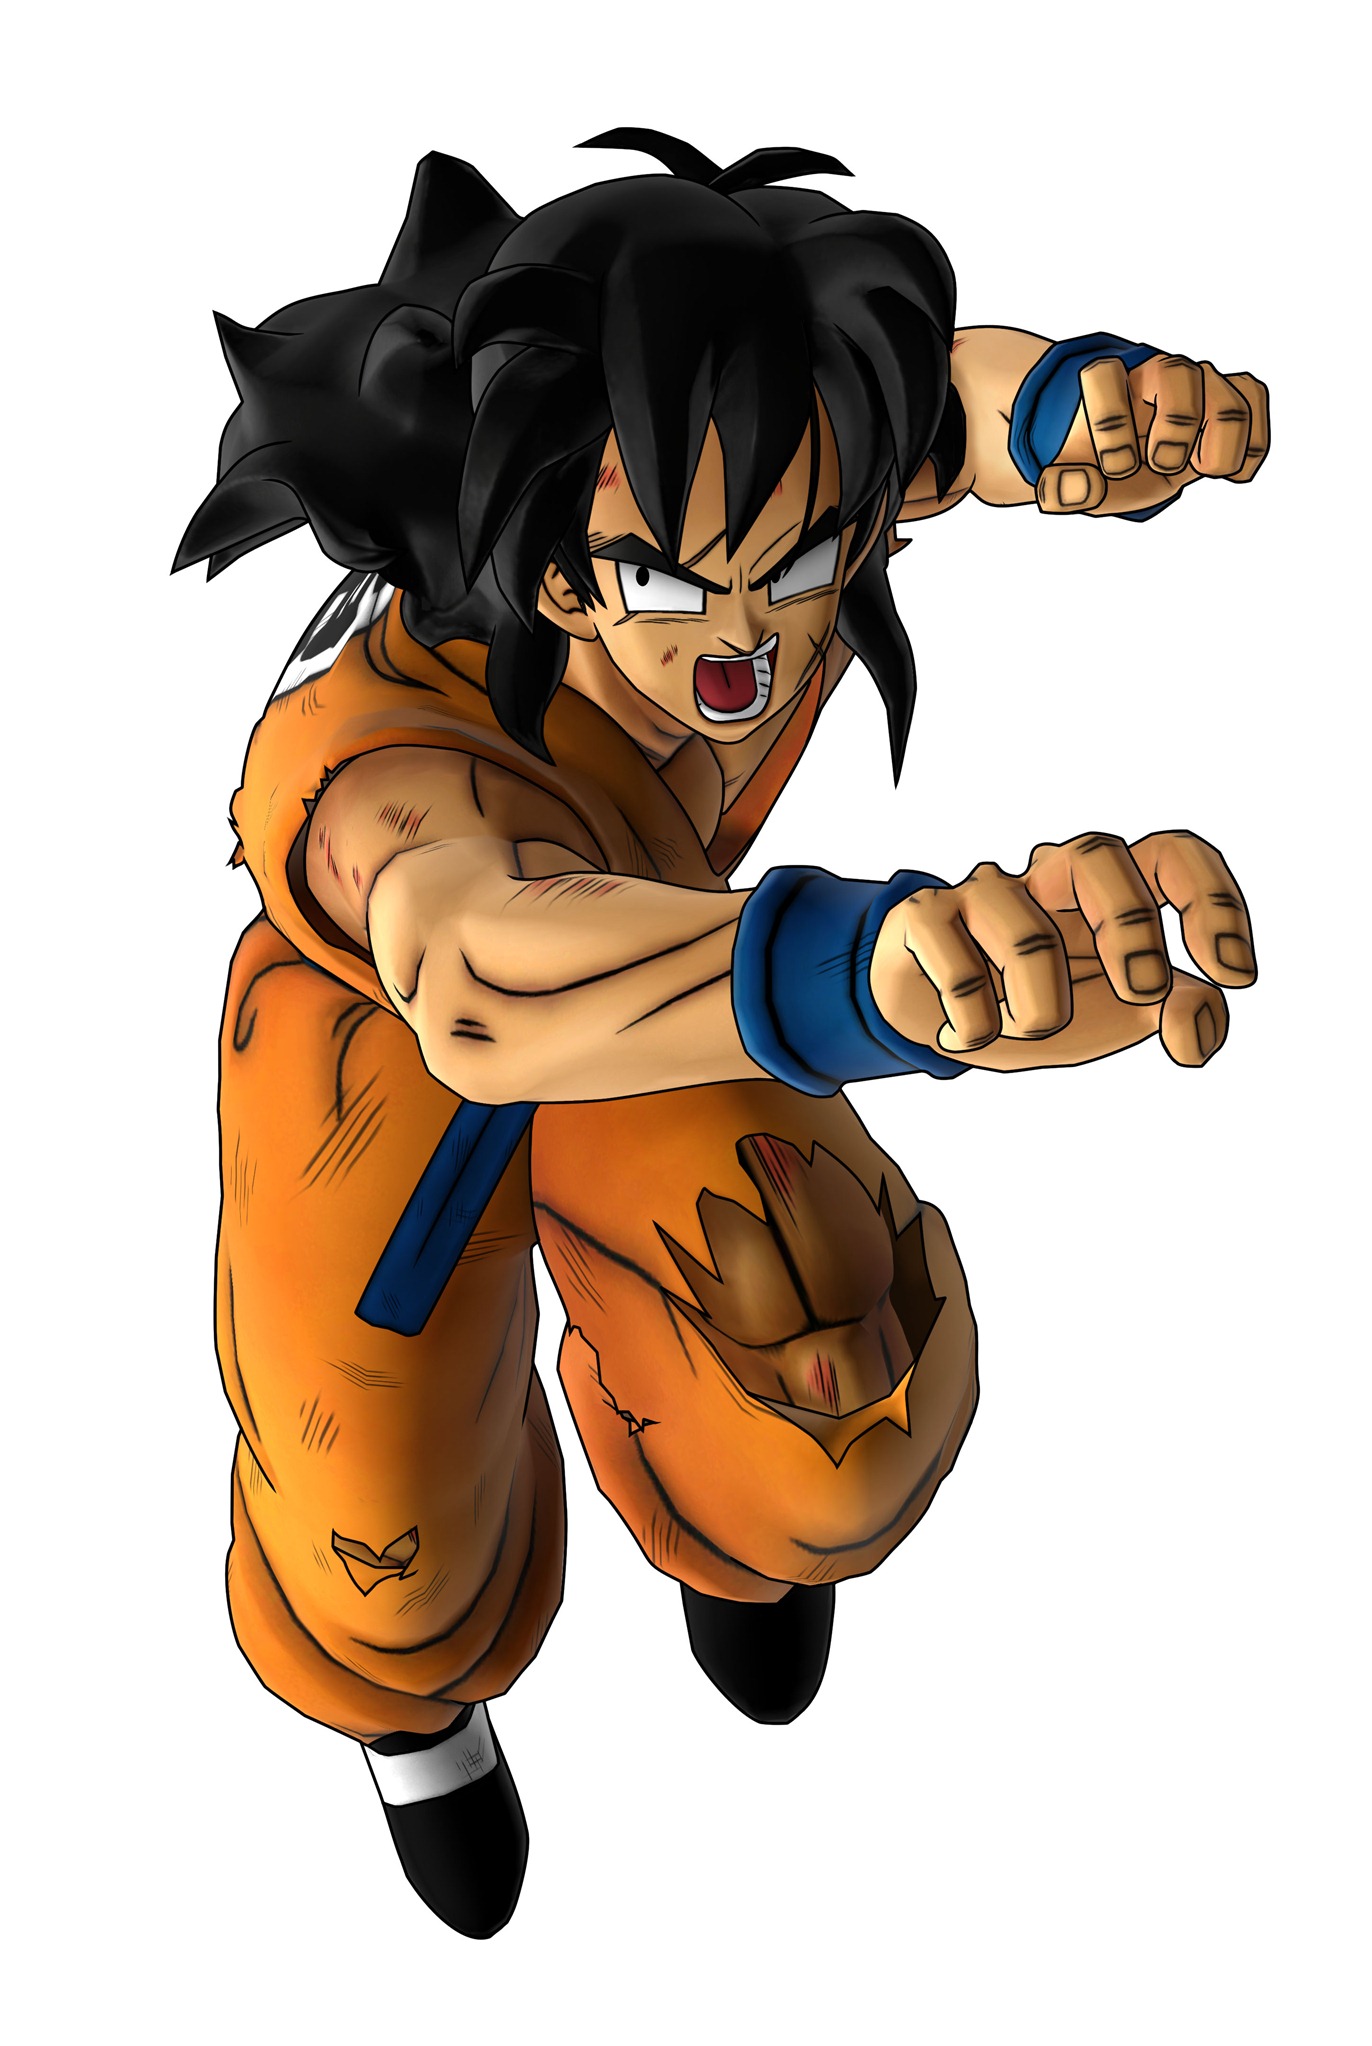 A former desert bandit, Yamcha was once an enemy of. but quickly reformed a...